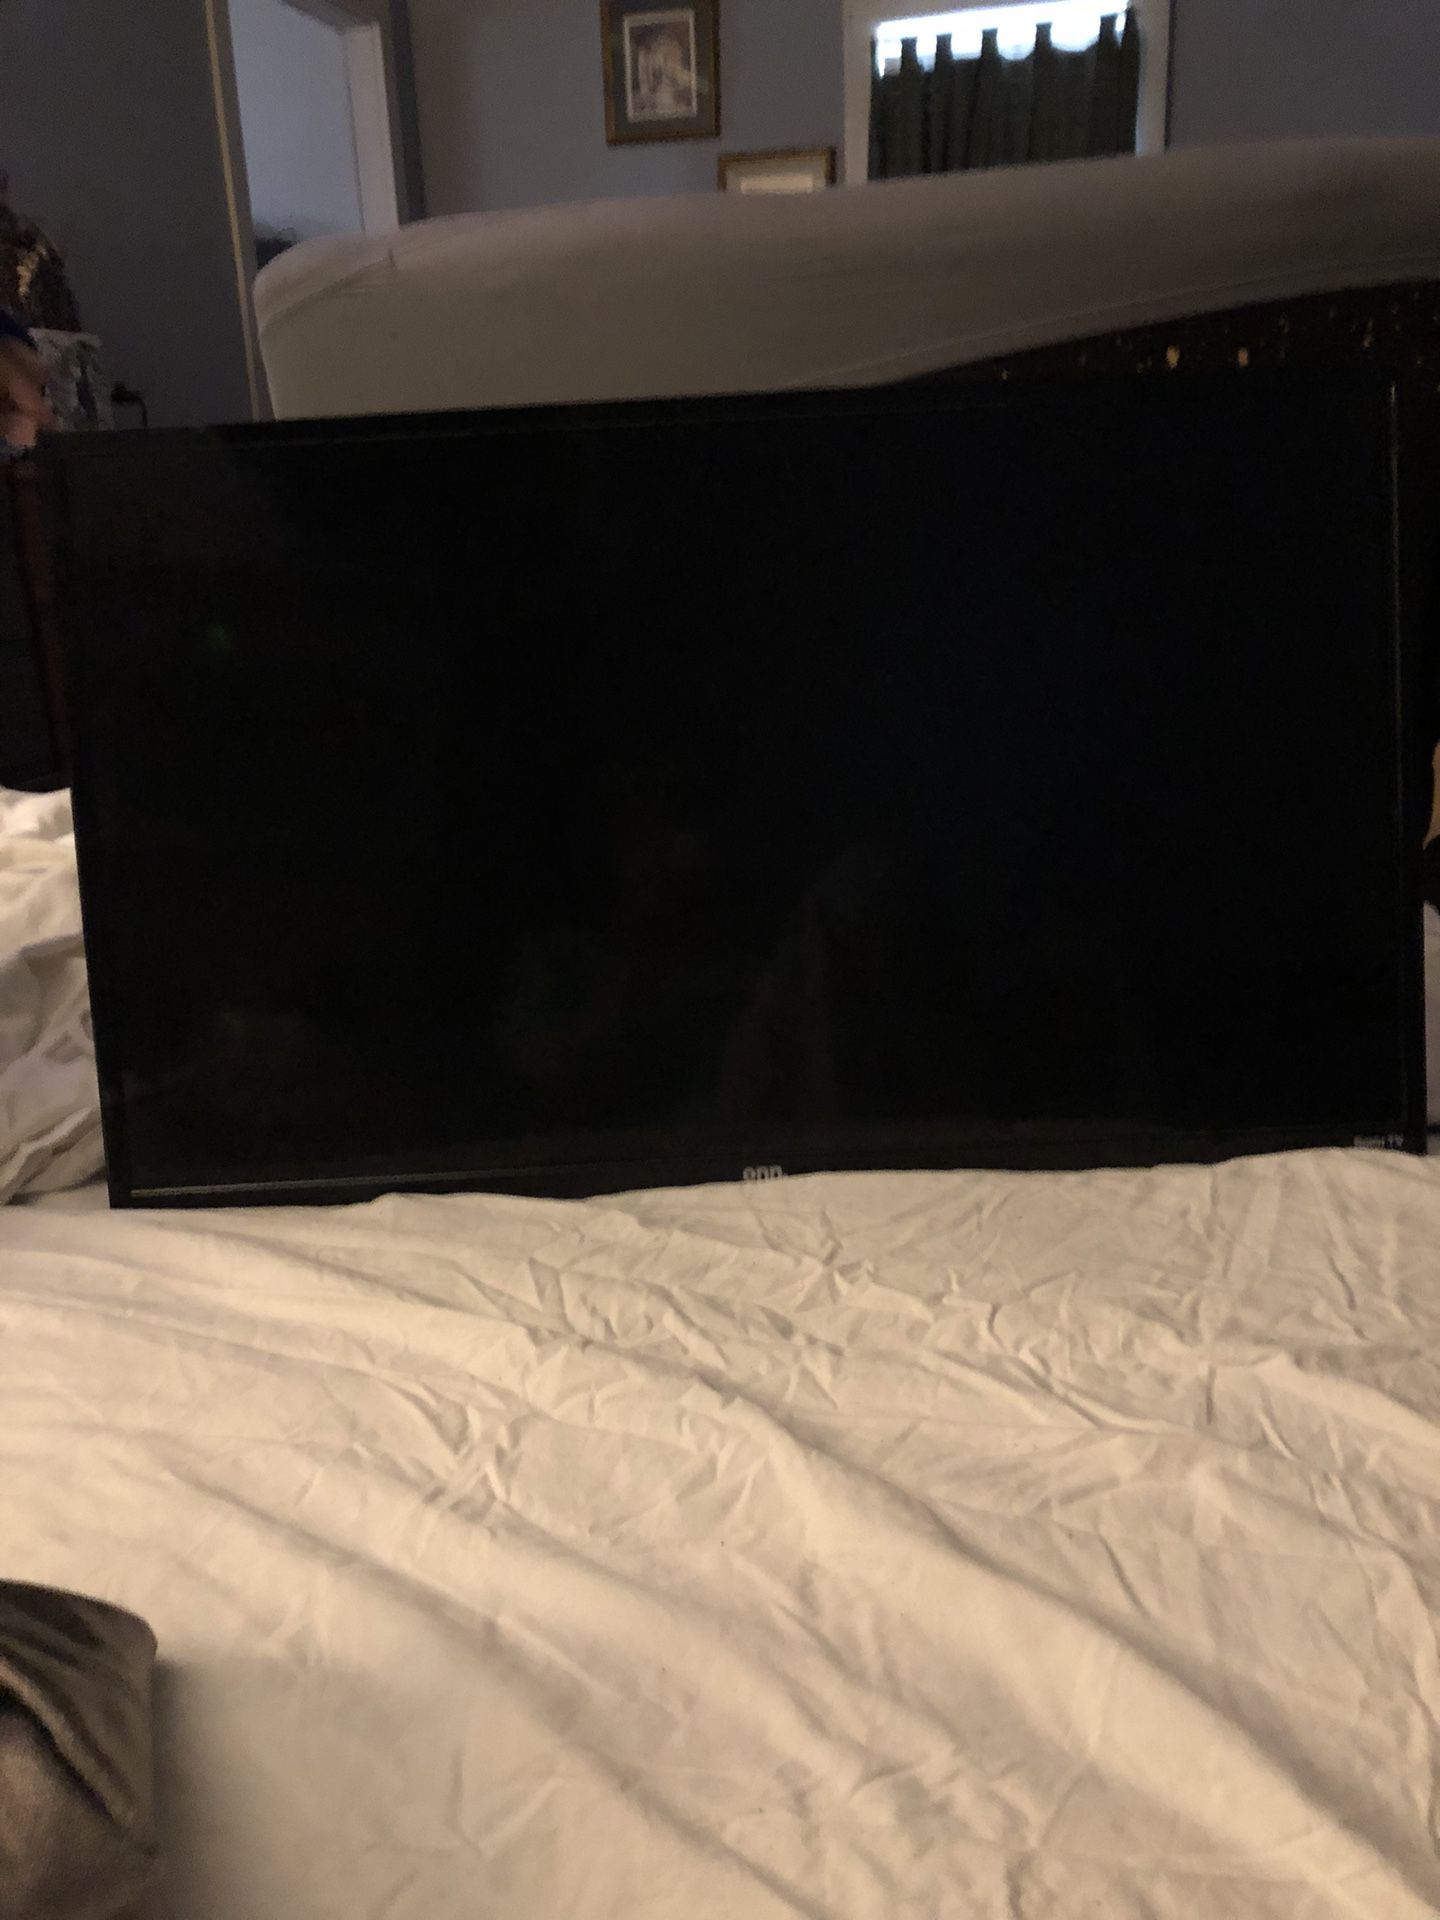 32 Inch Roku TV With Wall Mount 